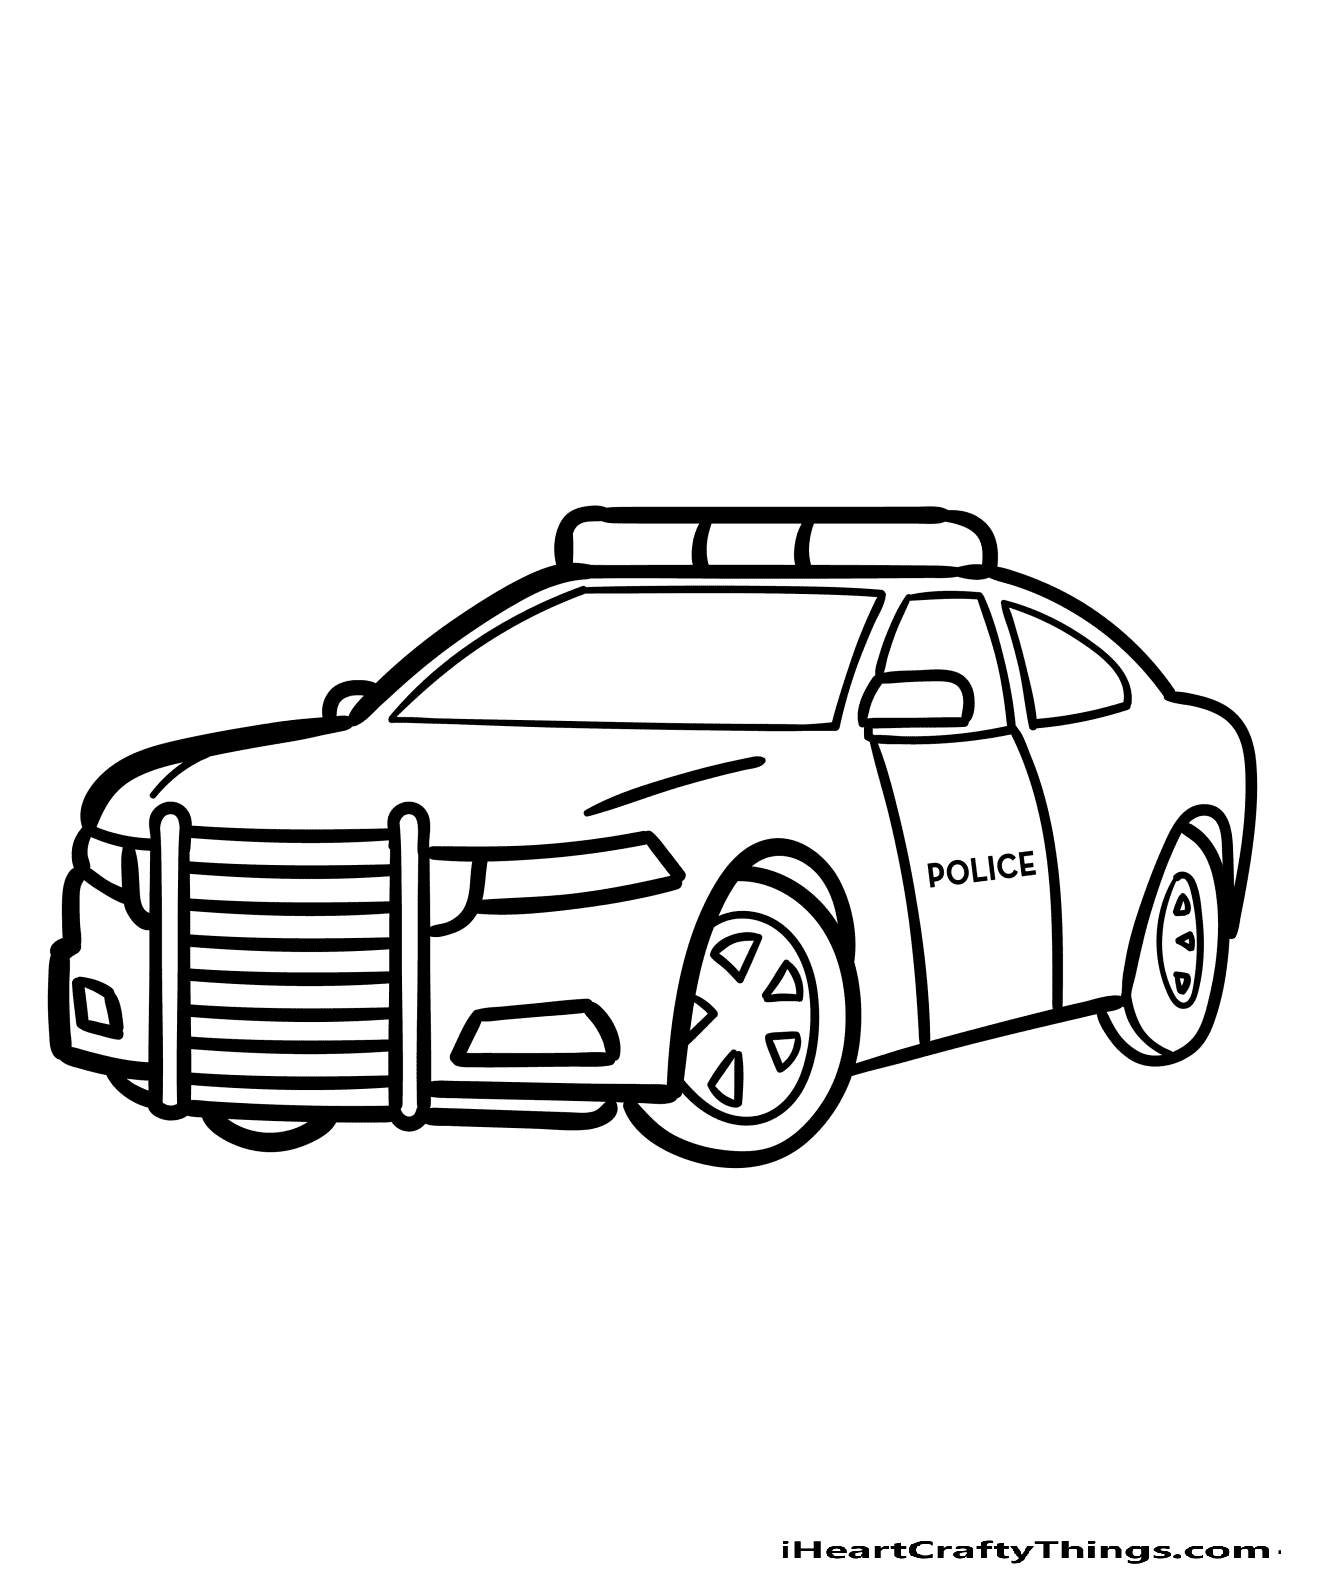 Dodge Charger Police Car Image Coloring Page